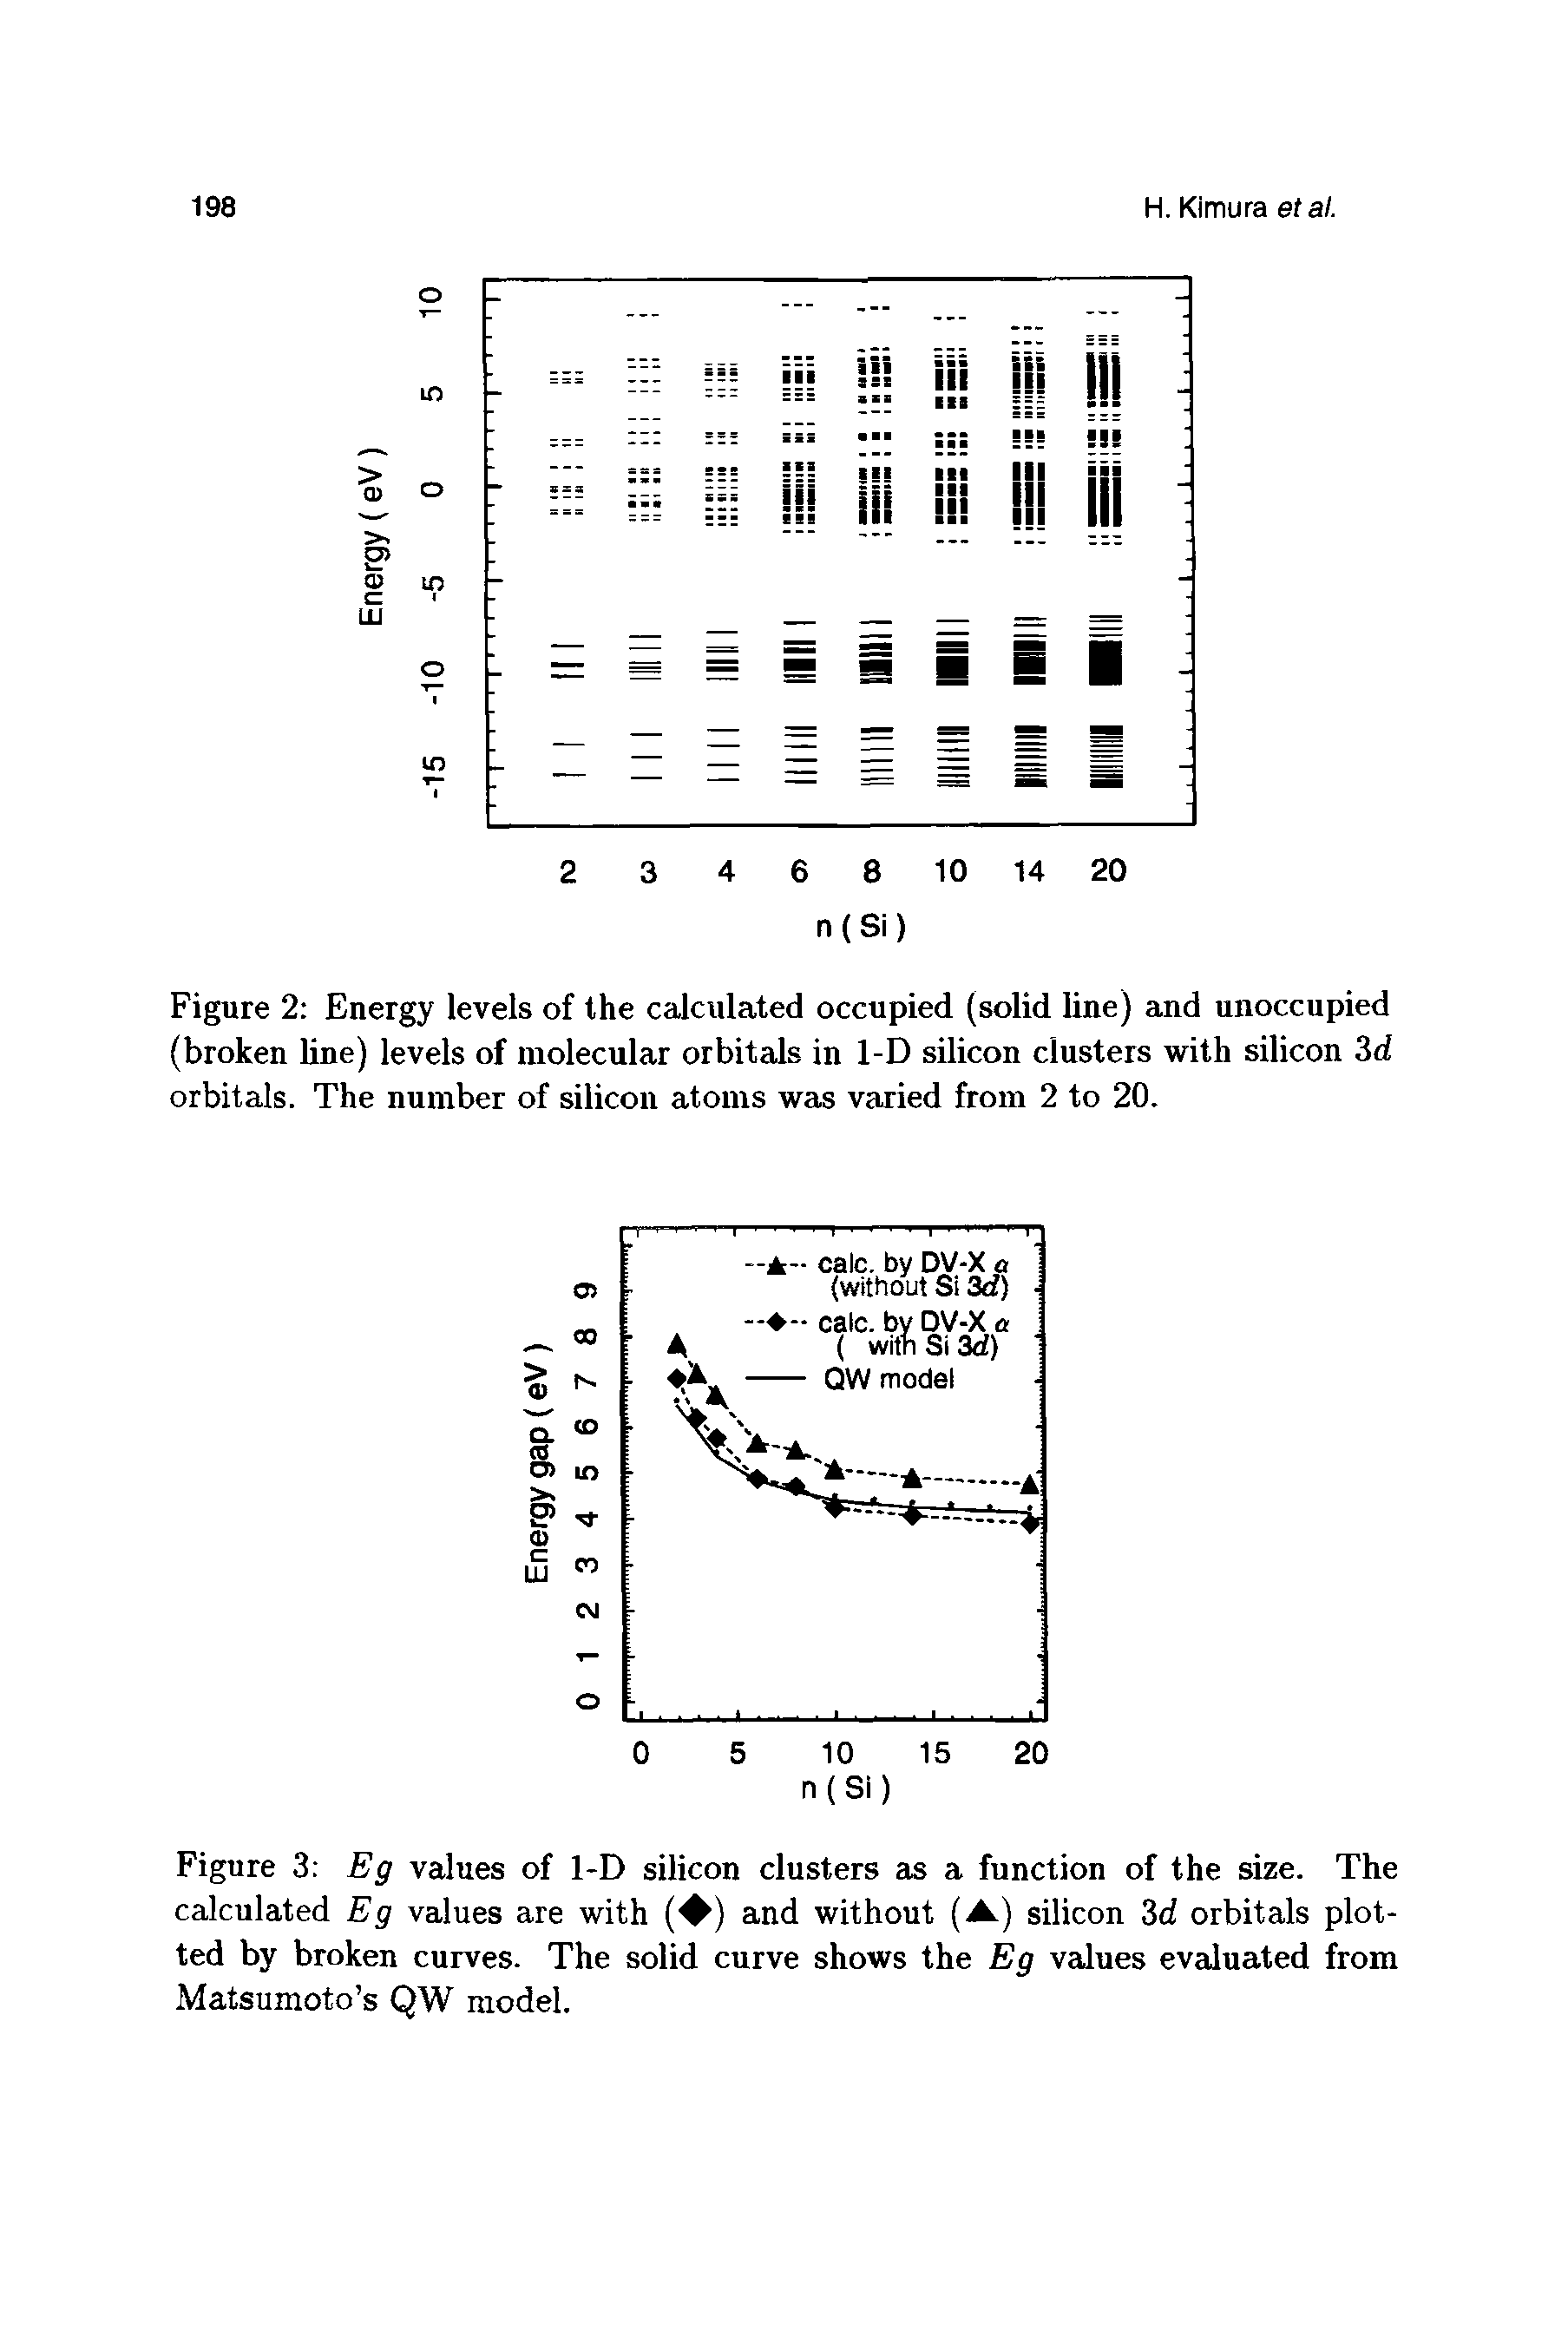 Figure 2 Energy levels of the calculated occupied (solid line) and unoccupied (broken line) levels of molecular orbitals in 1-D silicon clusters with silicon 3d orbitals. The number of silicon atoms was varied from 2 to 20.